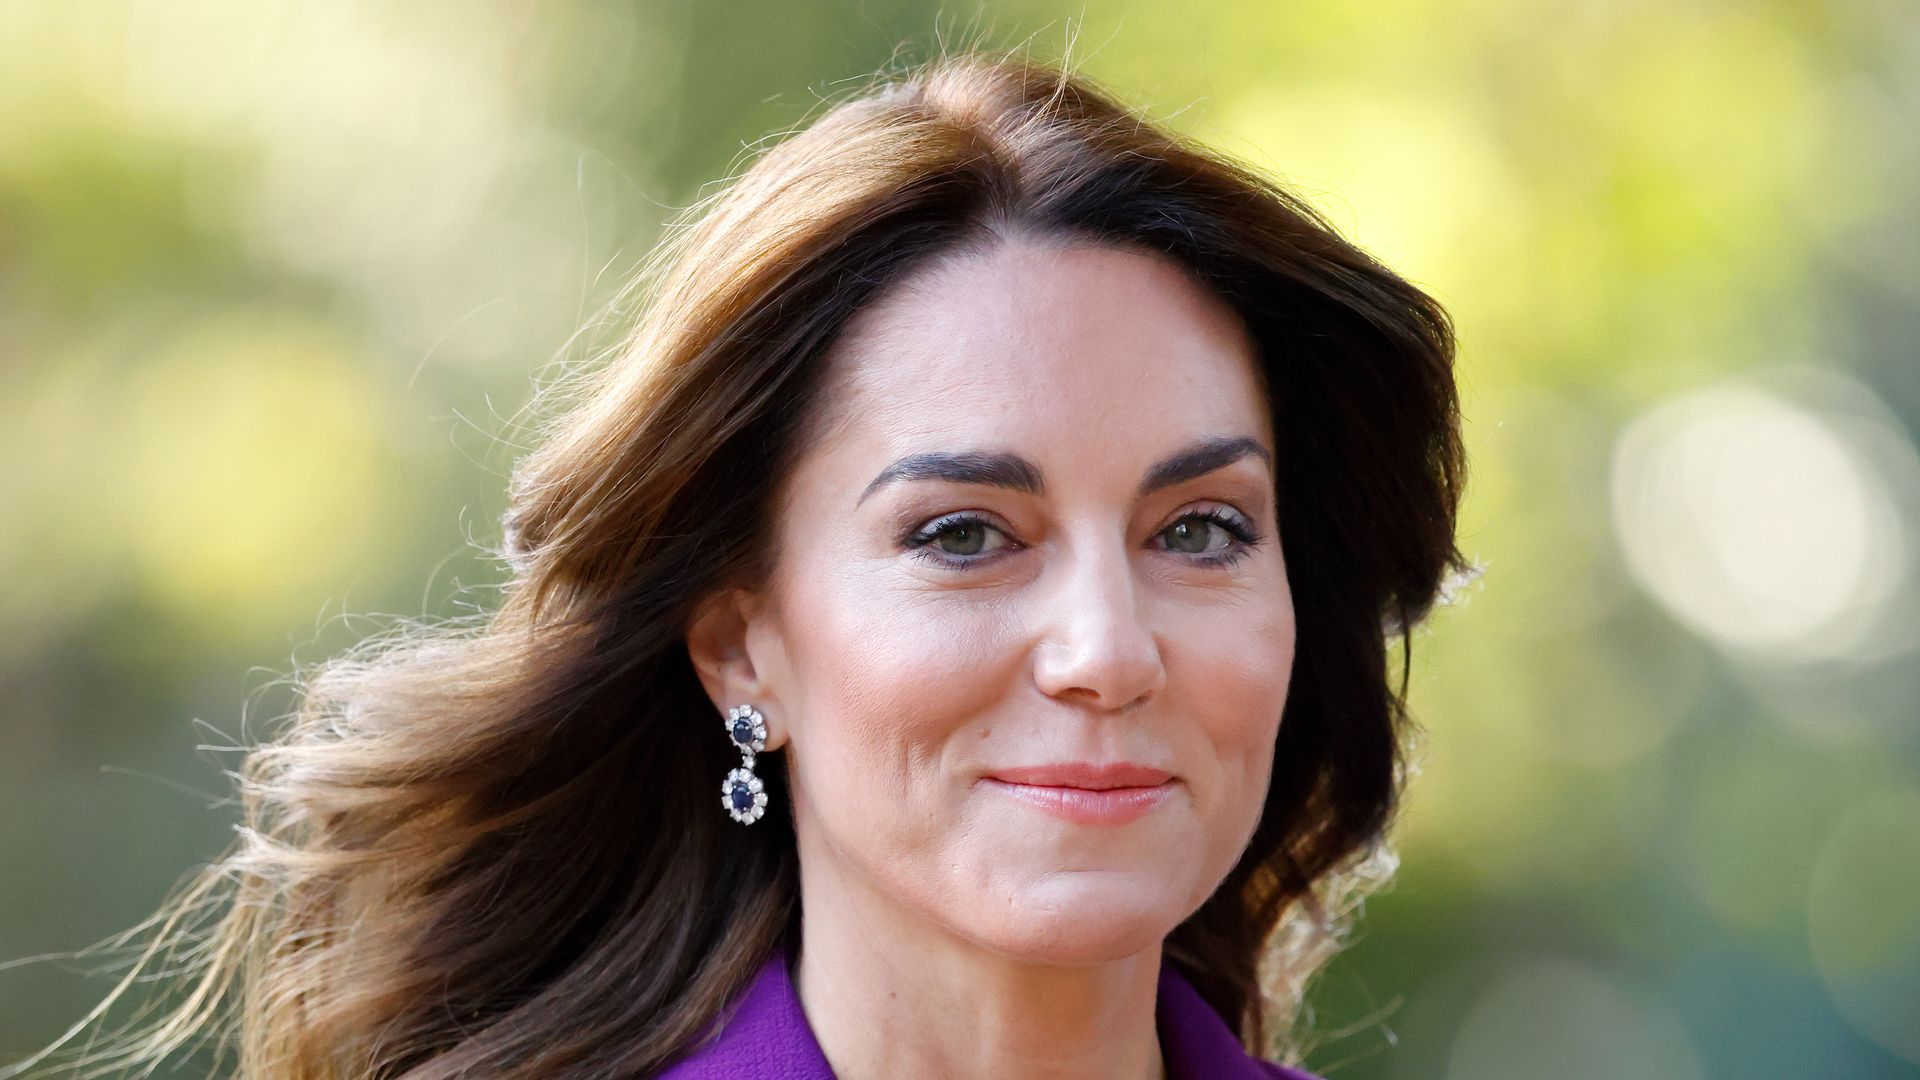 Kate Middleton in a purple outfit